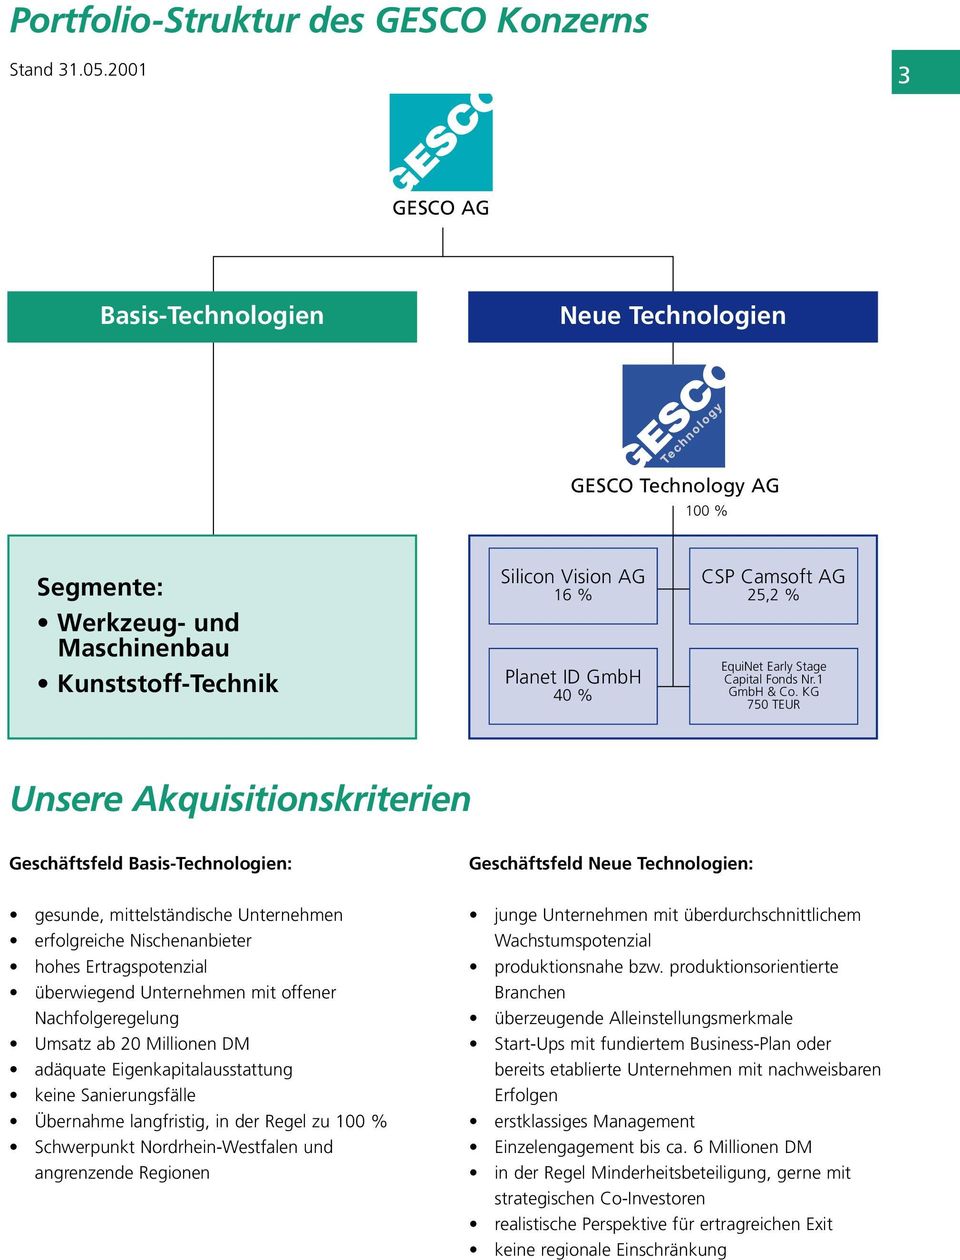 EquiNet Early Stage Capital Fonds Nr.1 GmbH & Co.